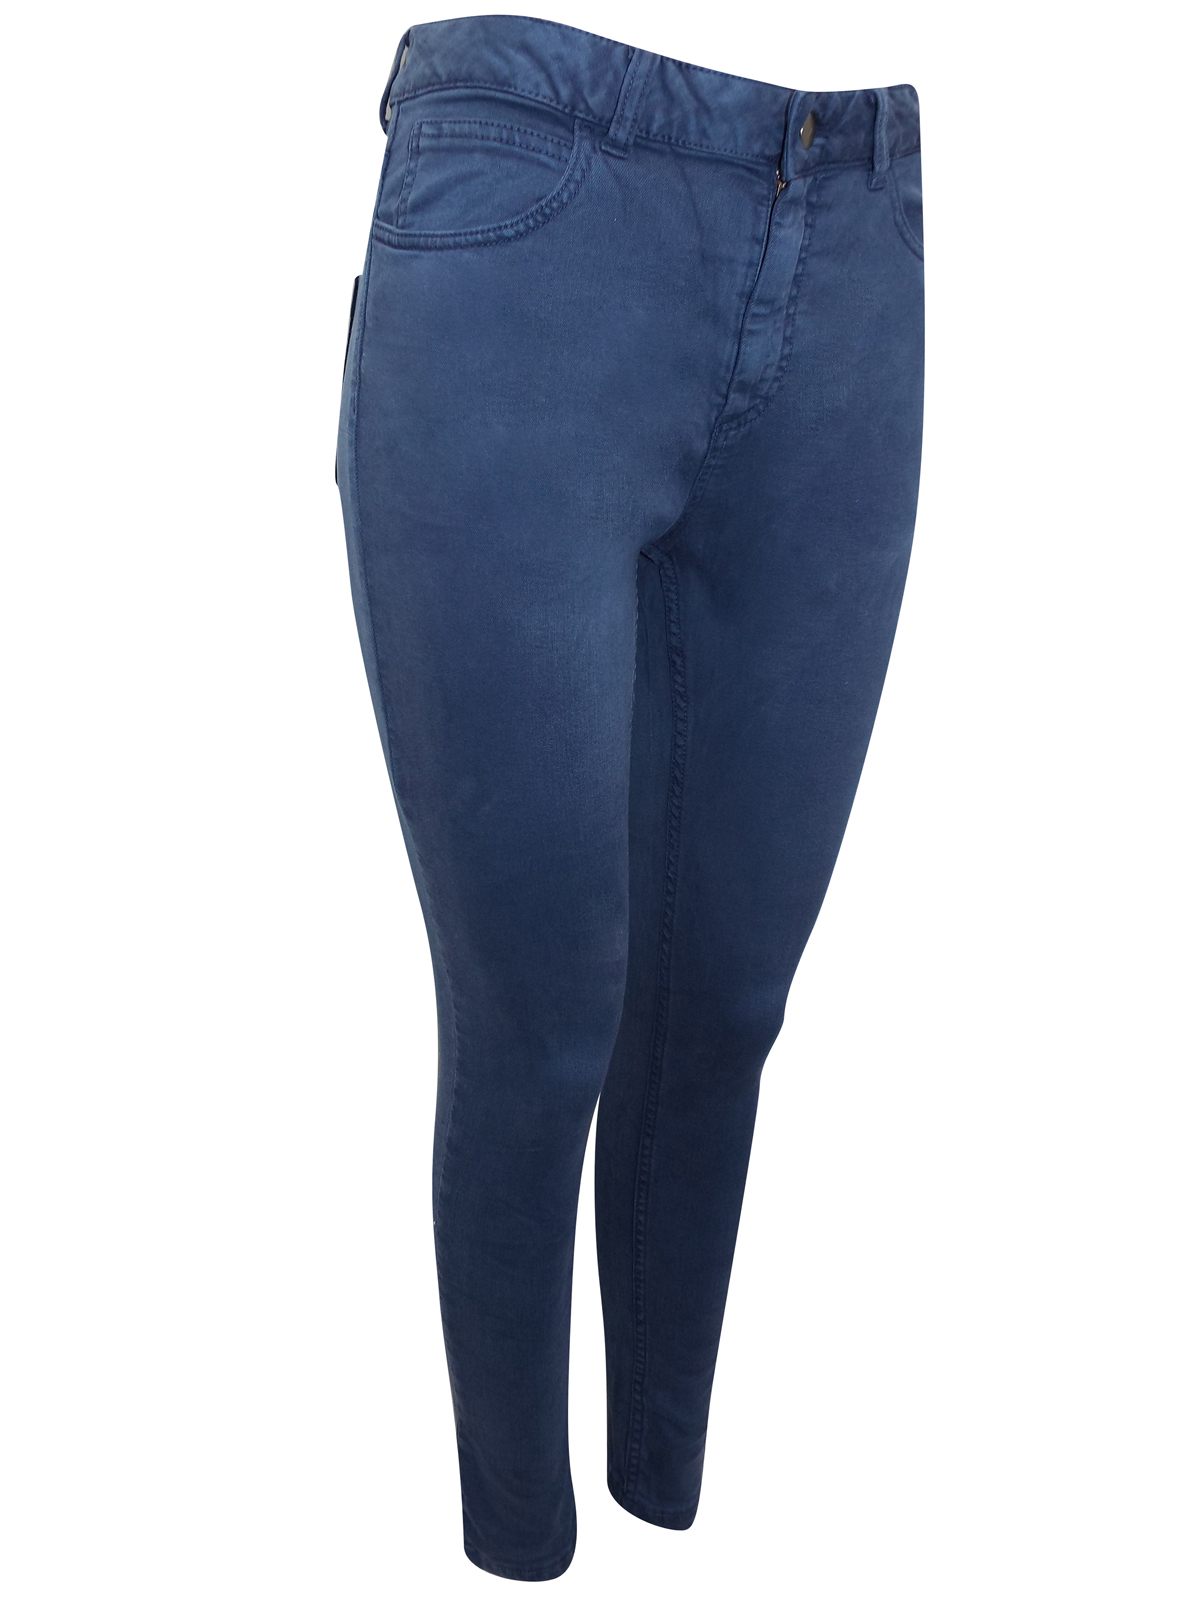 Marks and Spencer - - M&5 NAVY High Waisted Skinny Jeans - Size 8 to 20